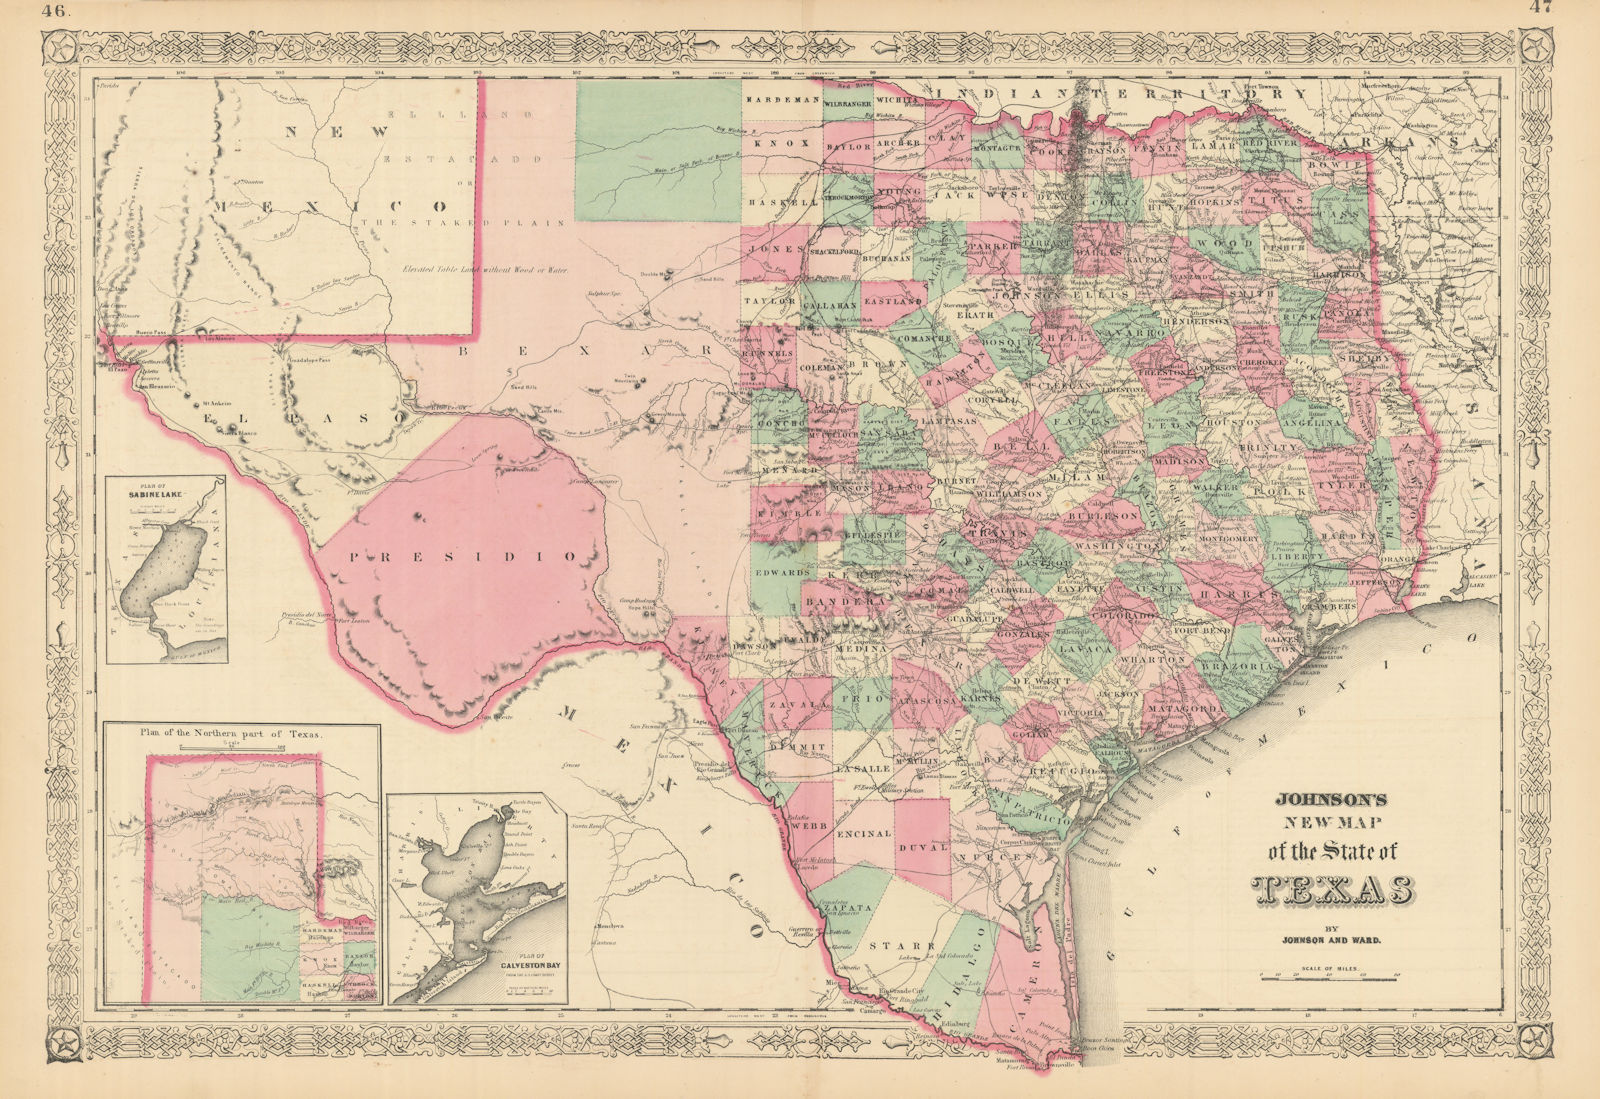 Johnson's New map of the State of Texas. US state map showing counties 1866